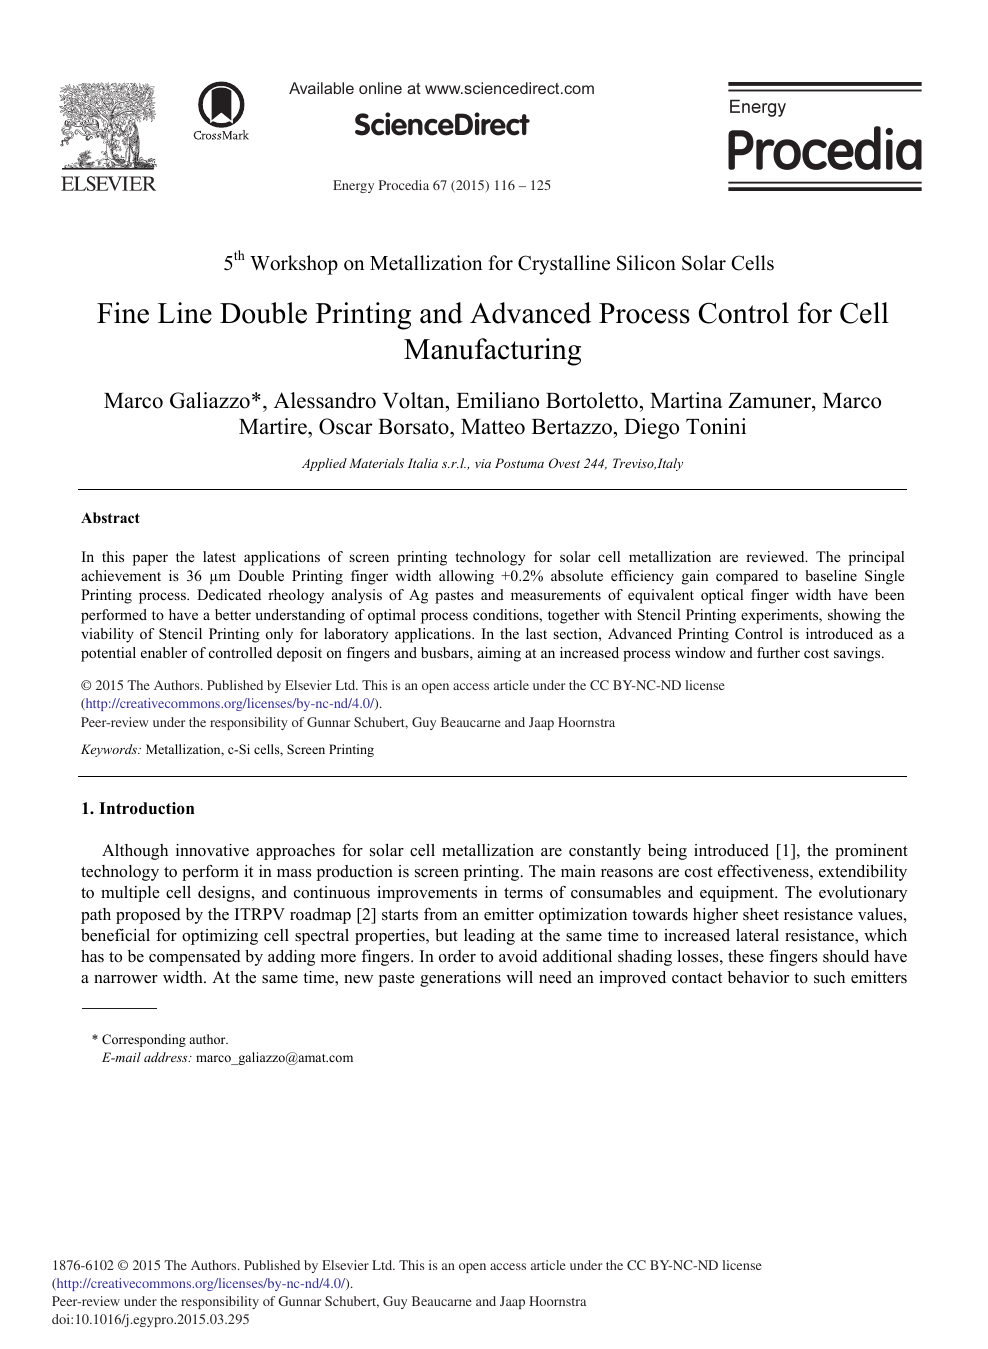 Fine Line Double Printing And Advanced Process Control For Cell Manufacturing Topic Of Research Paper In Materials Engineering Download Scholarly Article Pdf And Read For Free On Cyberleninka Open Science Hub